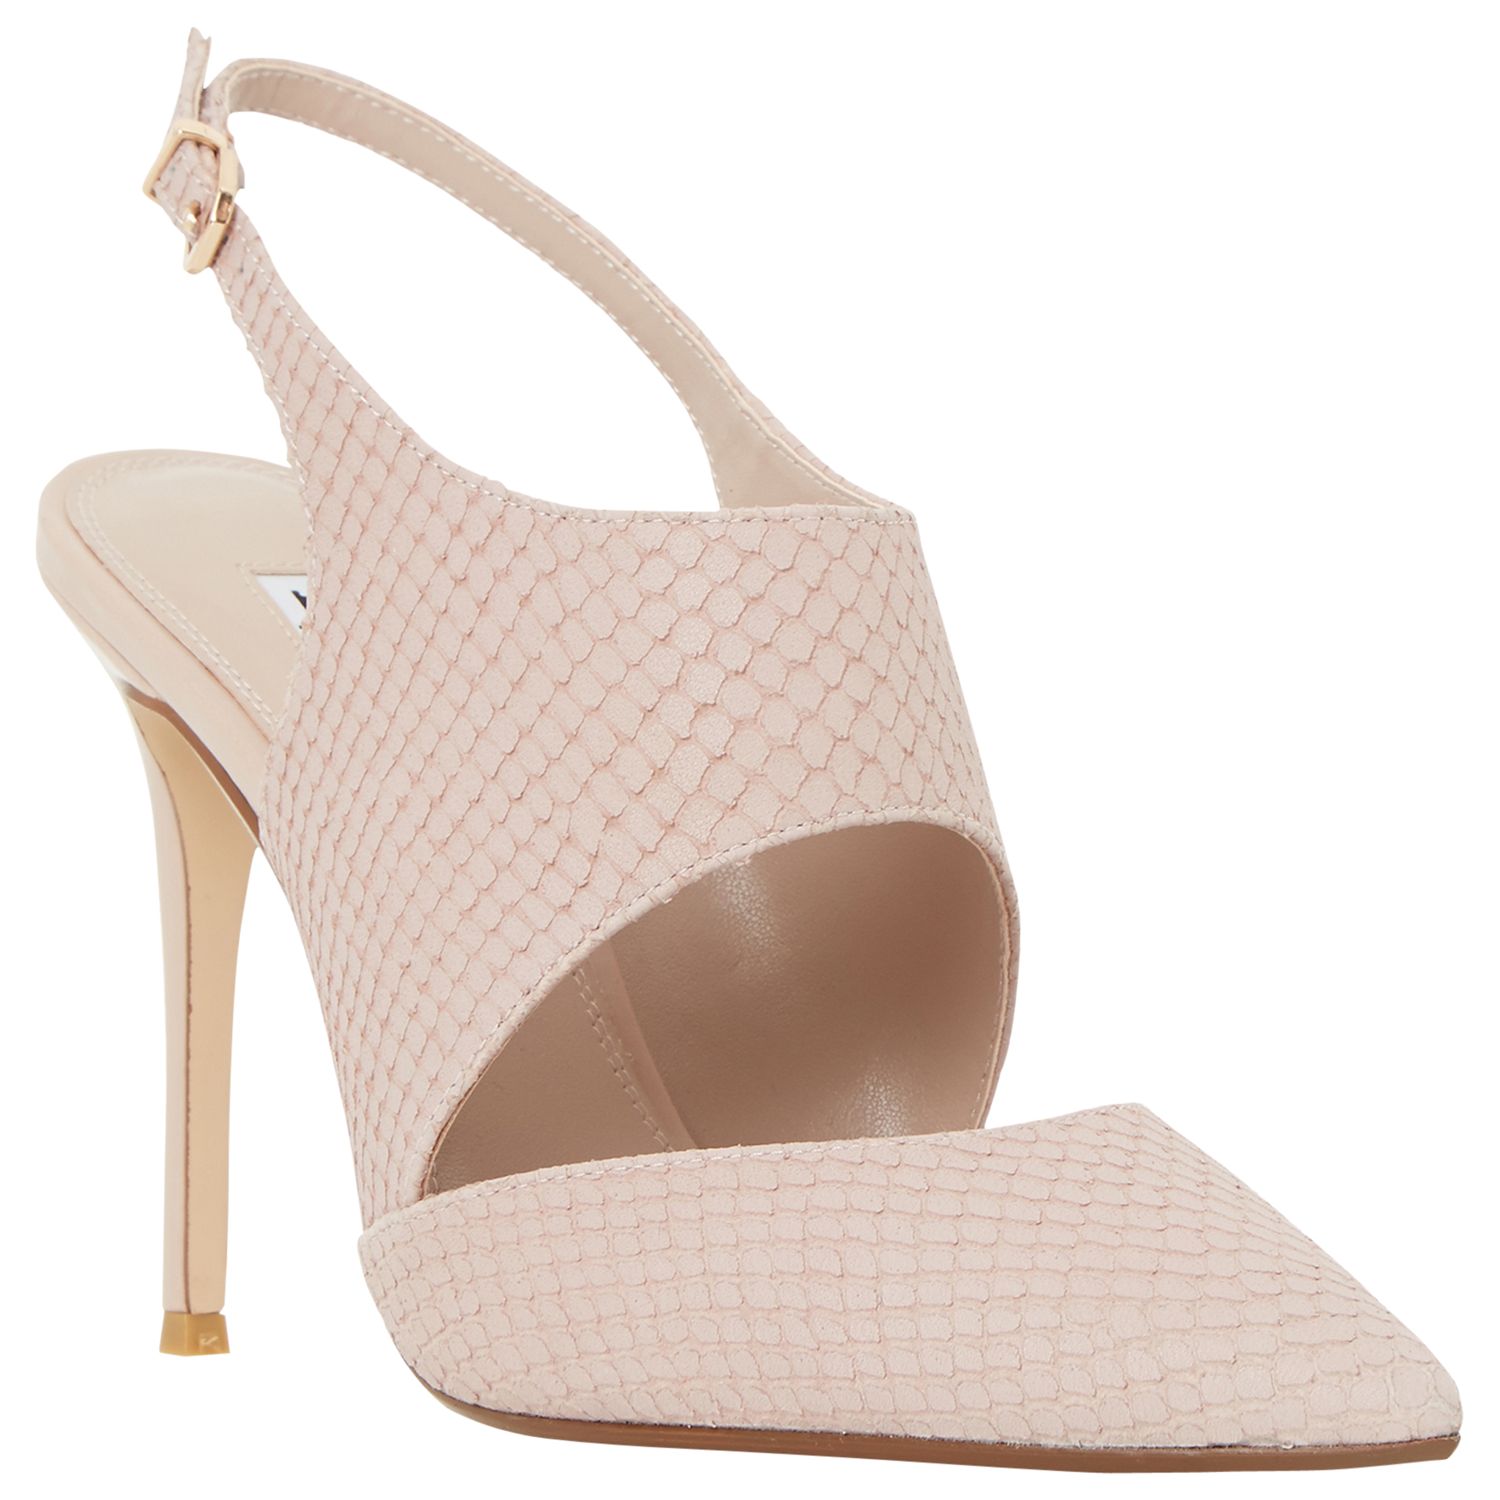 Dune Caprice Cut Out Sling Back Court Shoes, Blush Reptile